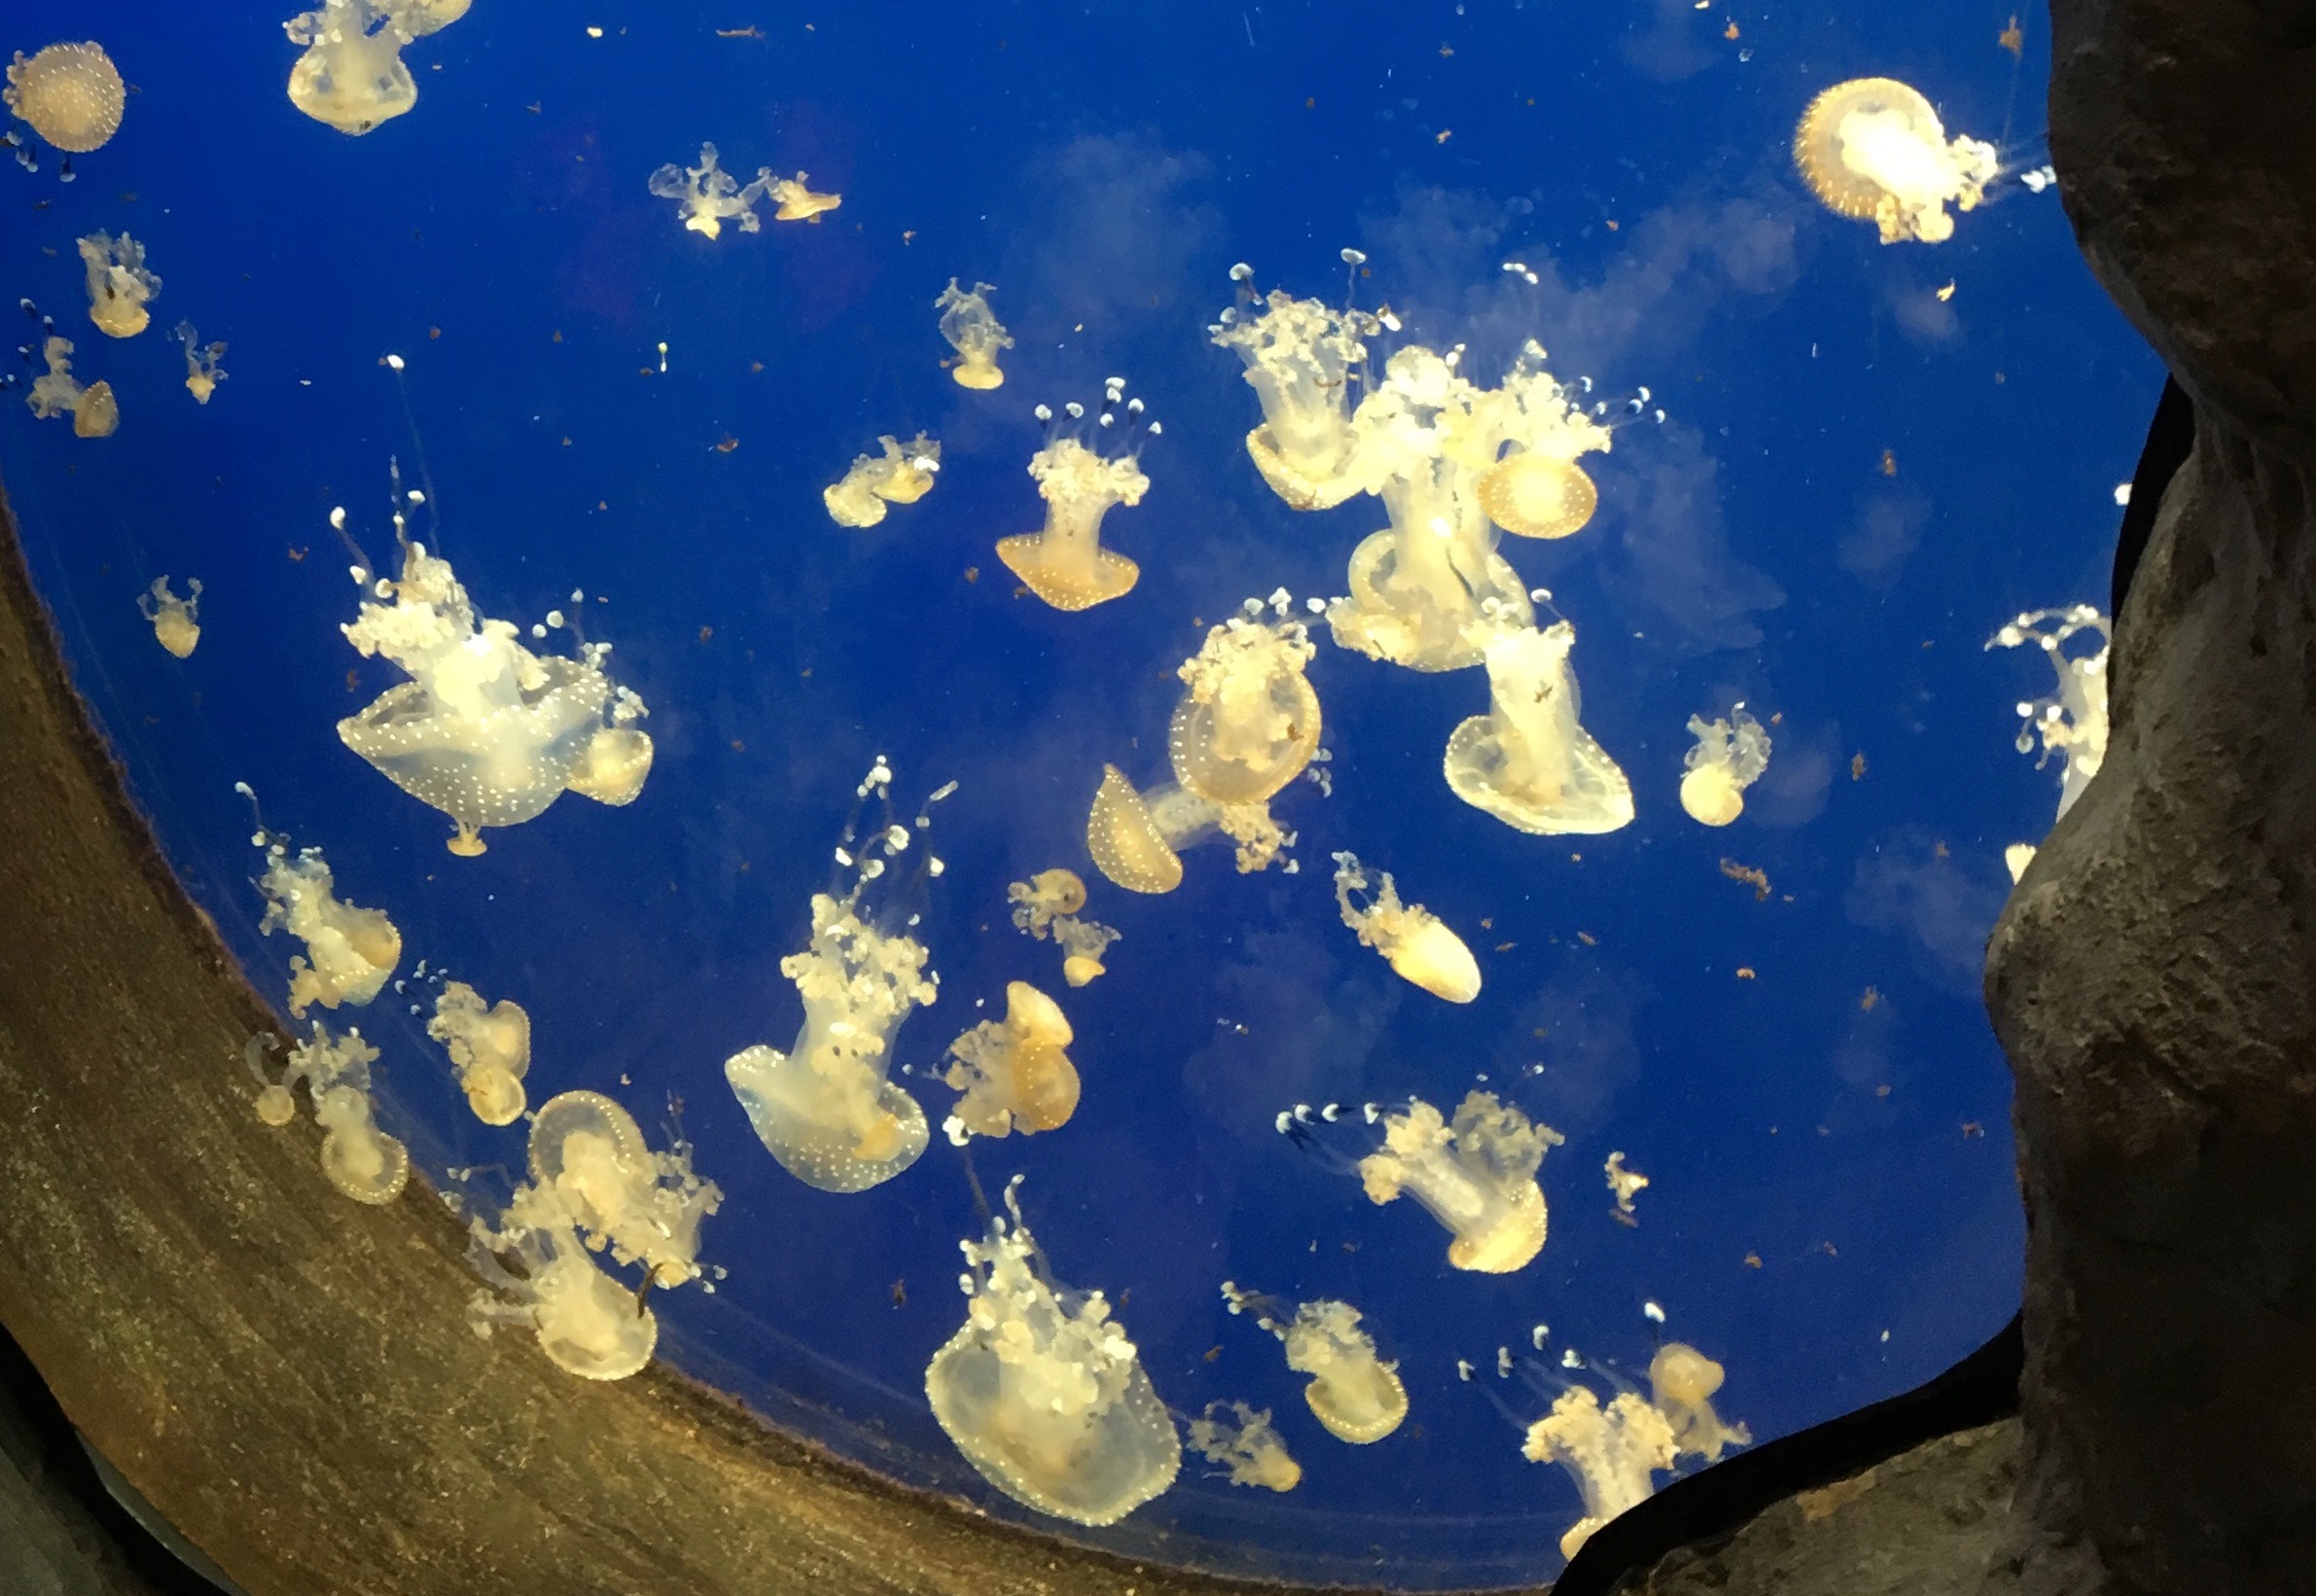 a group of jellyfish in water